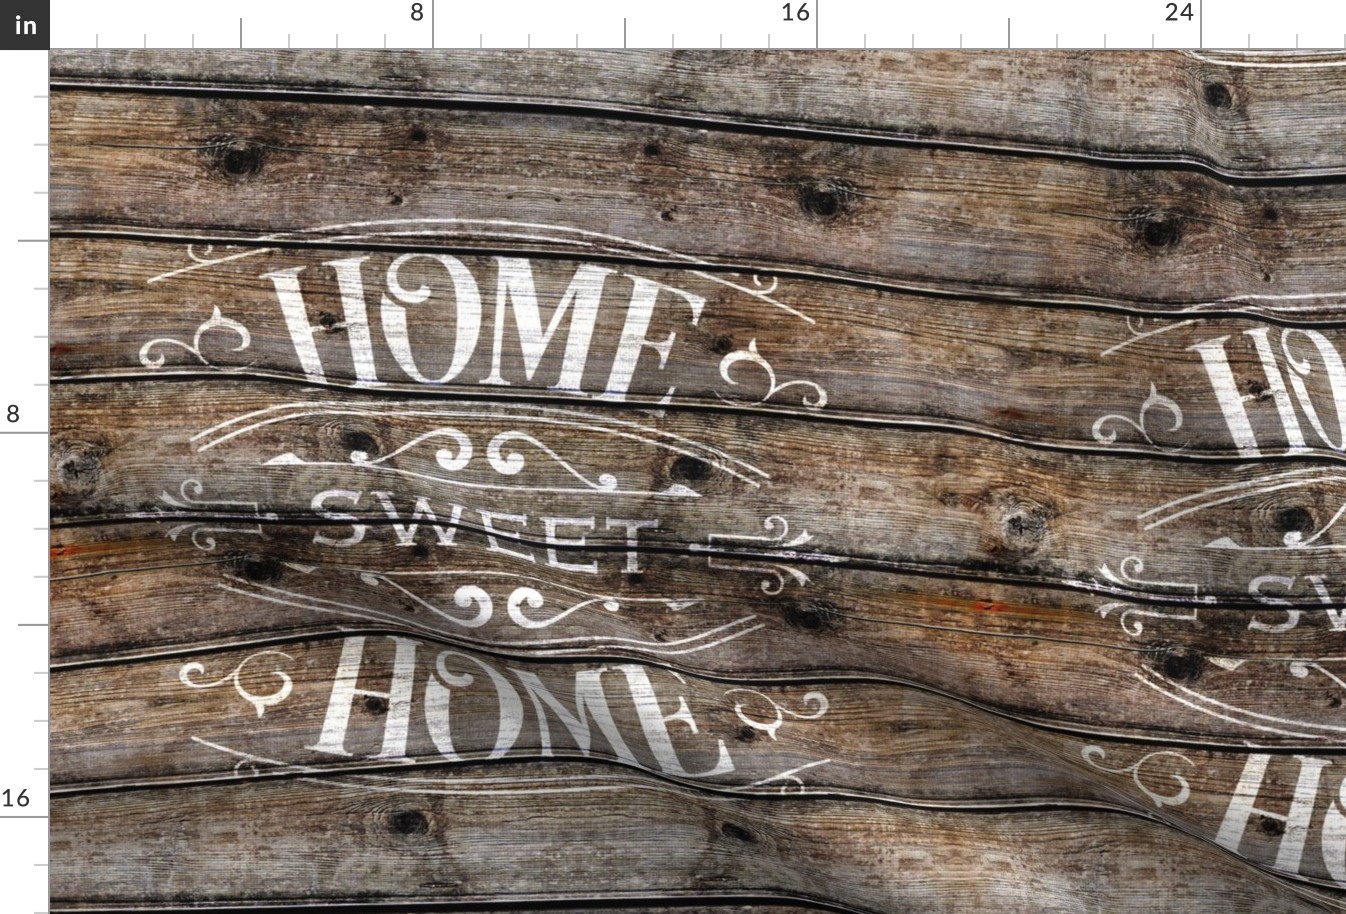 Home Sweet Home Version 1 on Barn wood 18 inch square